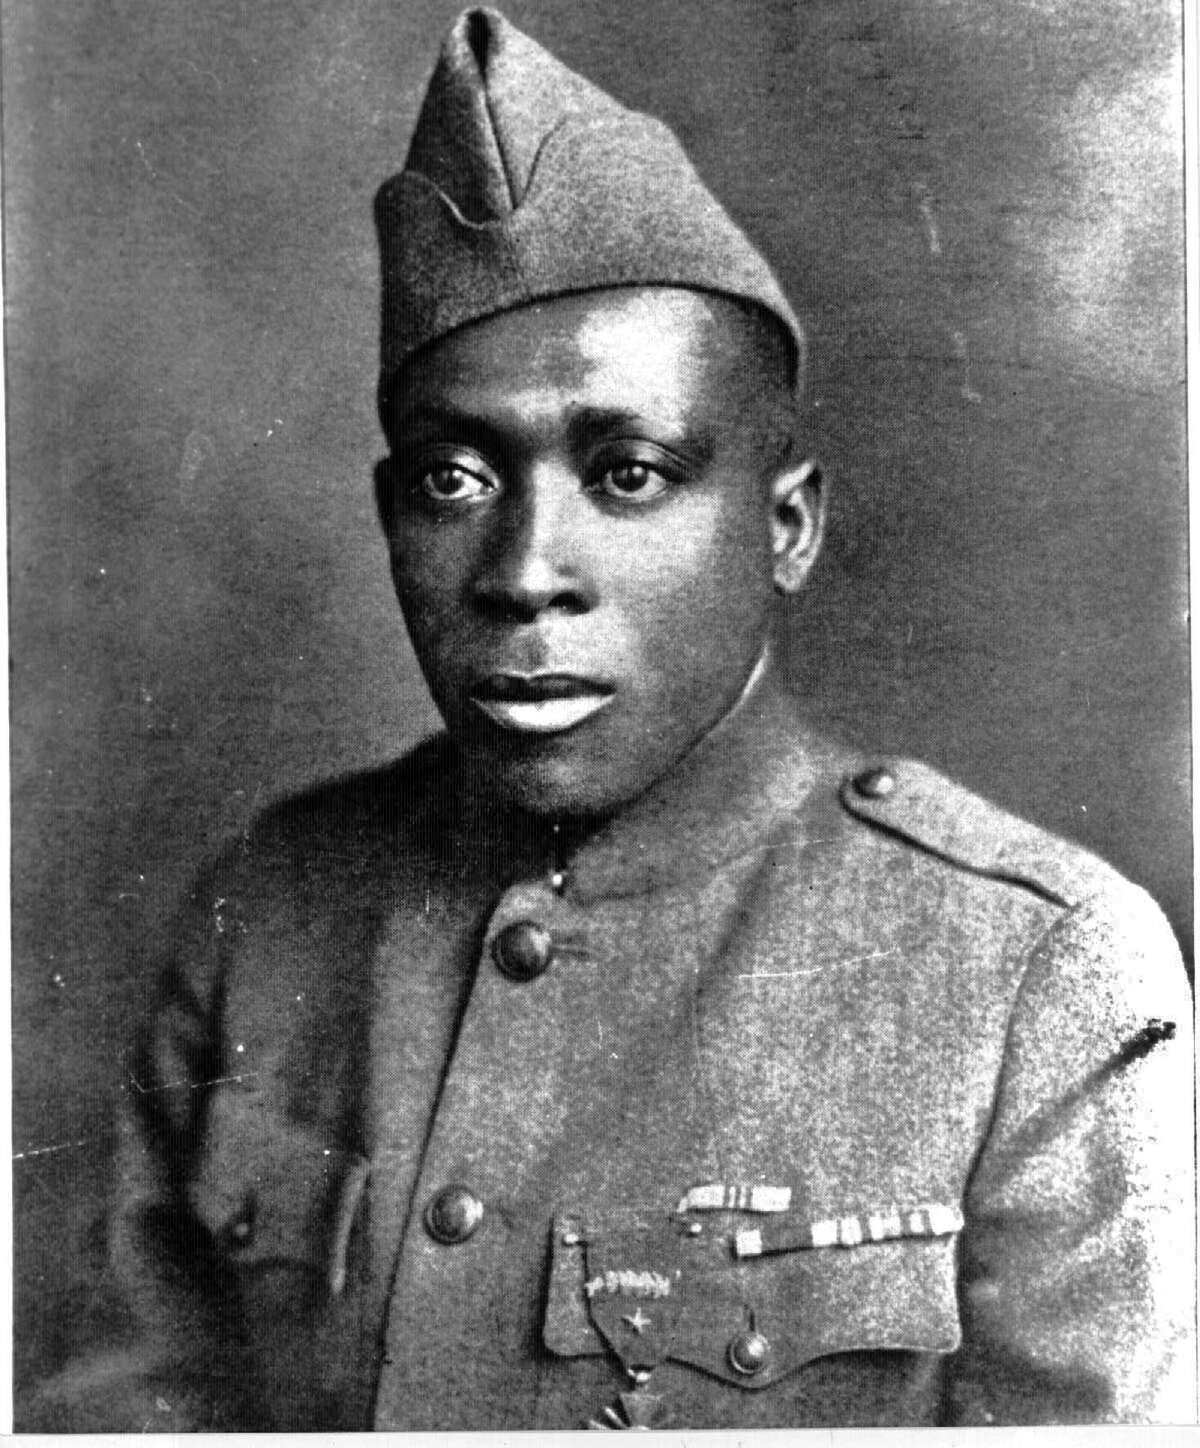 Sgt Henry Johnson Closer To Medal Of Honor